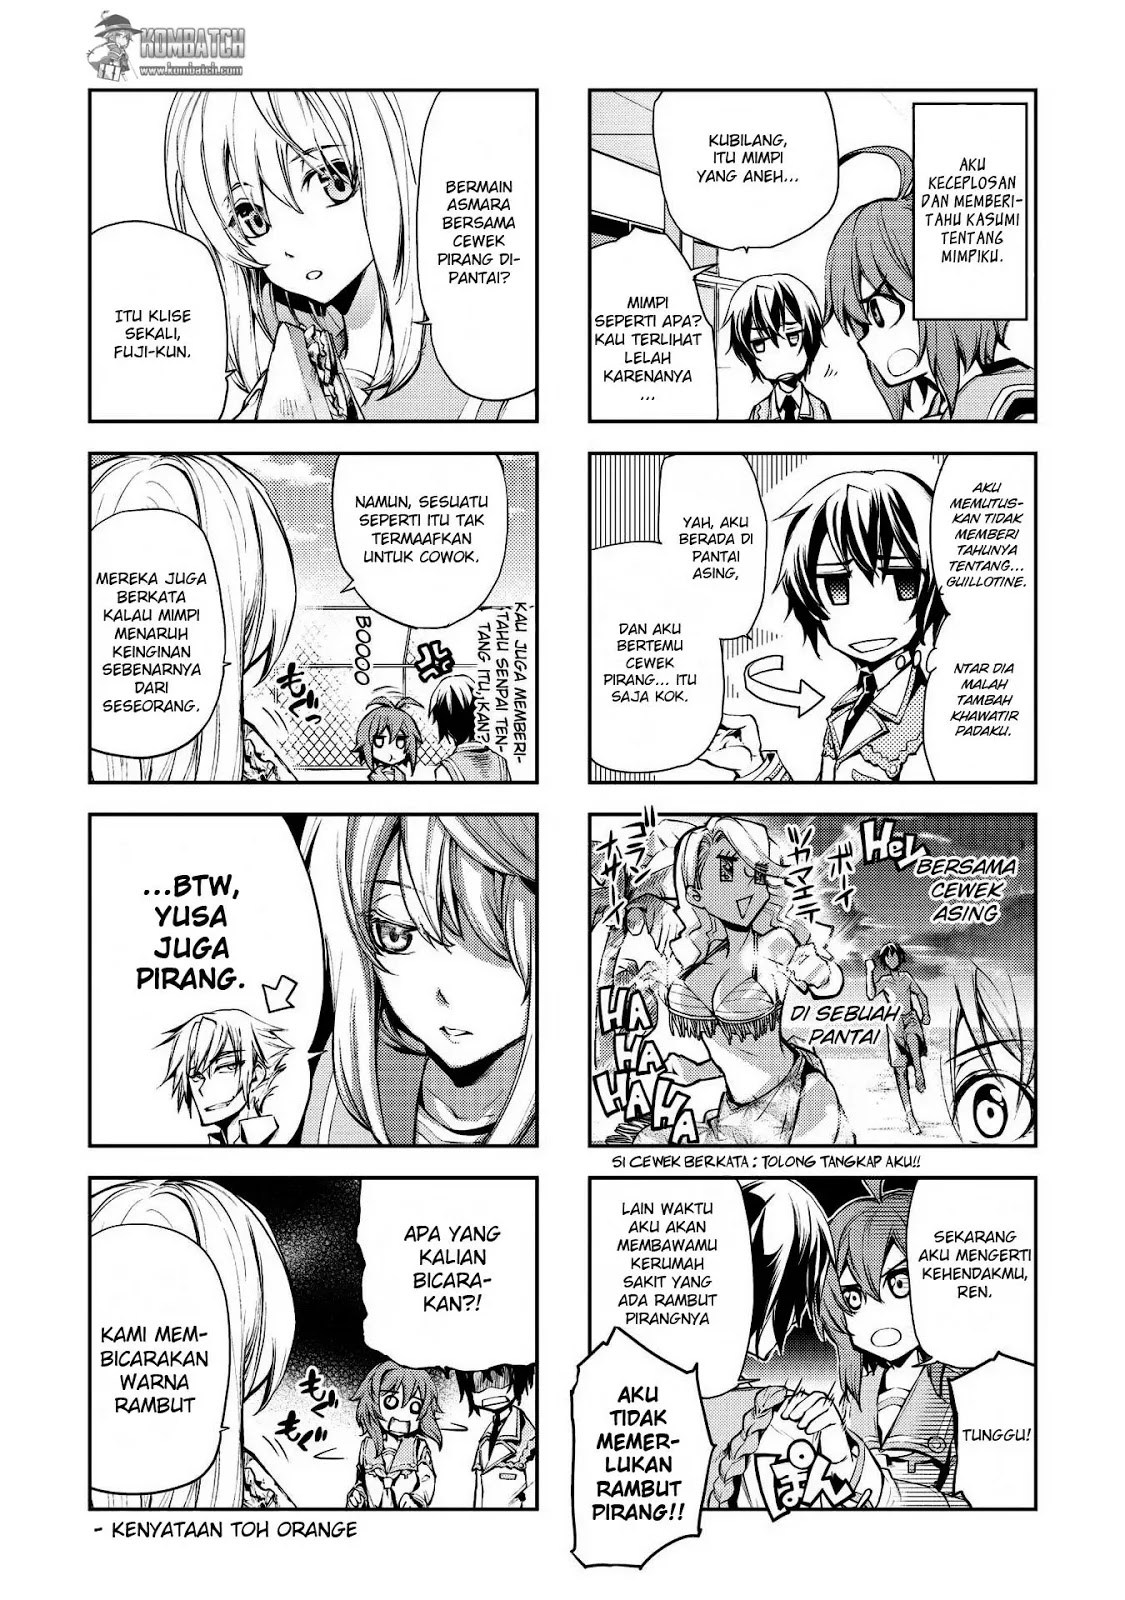 Dies Irae Amantes Amentes Chapter 05.5